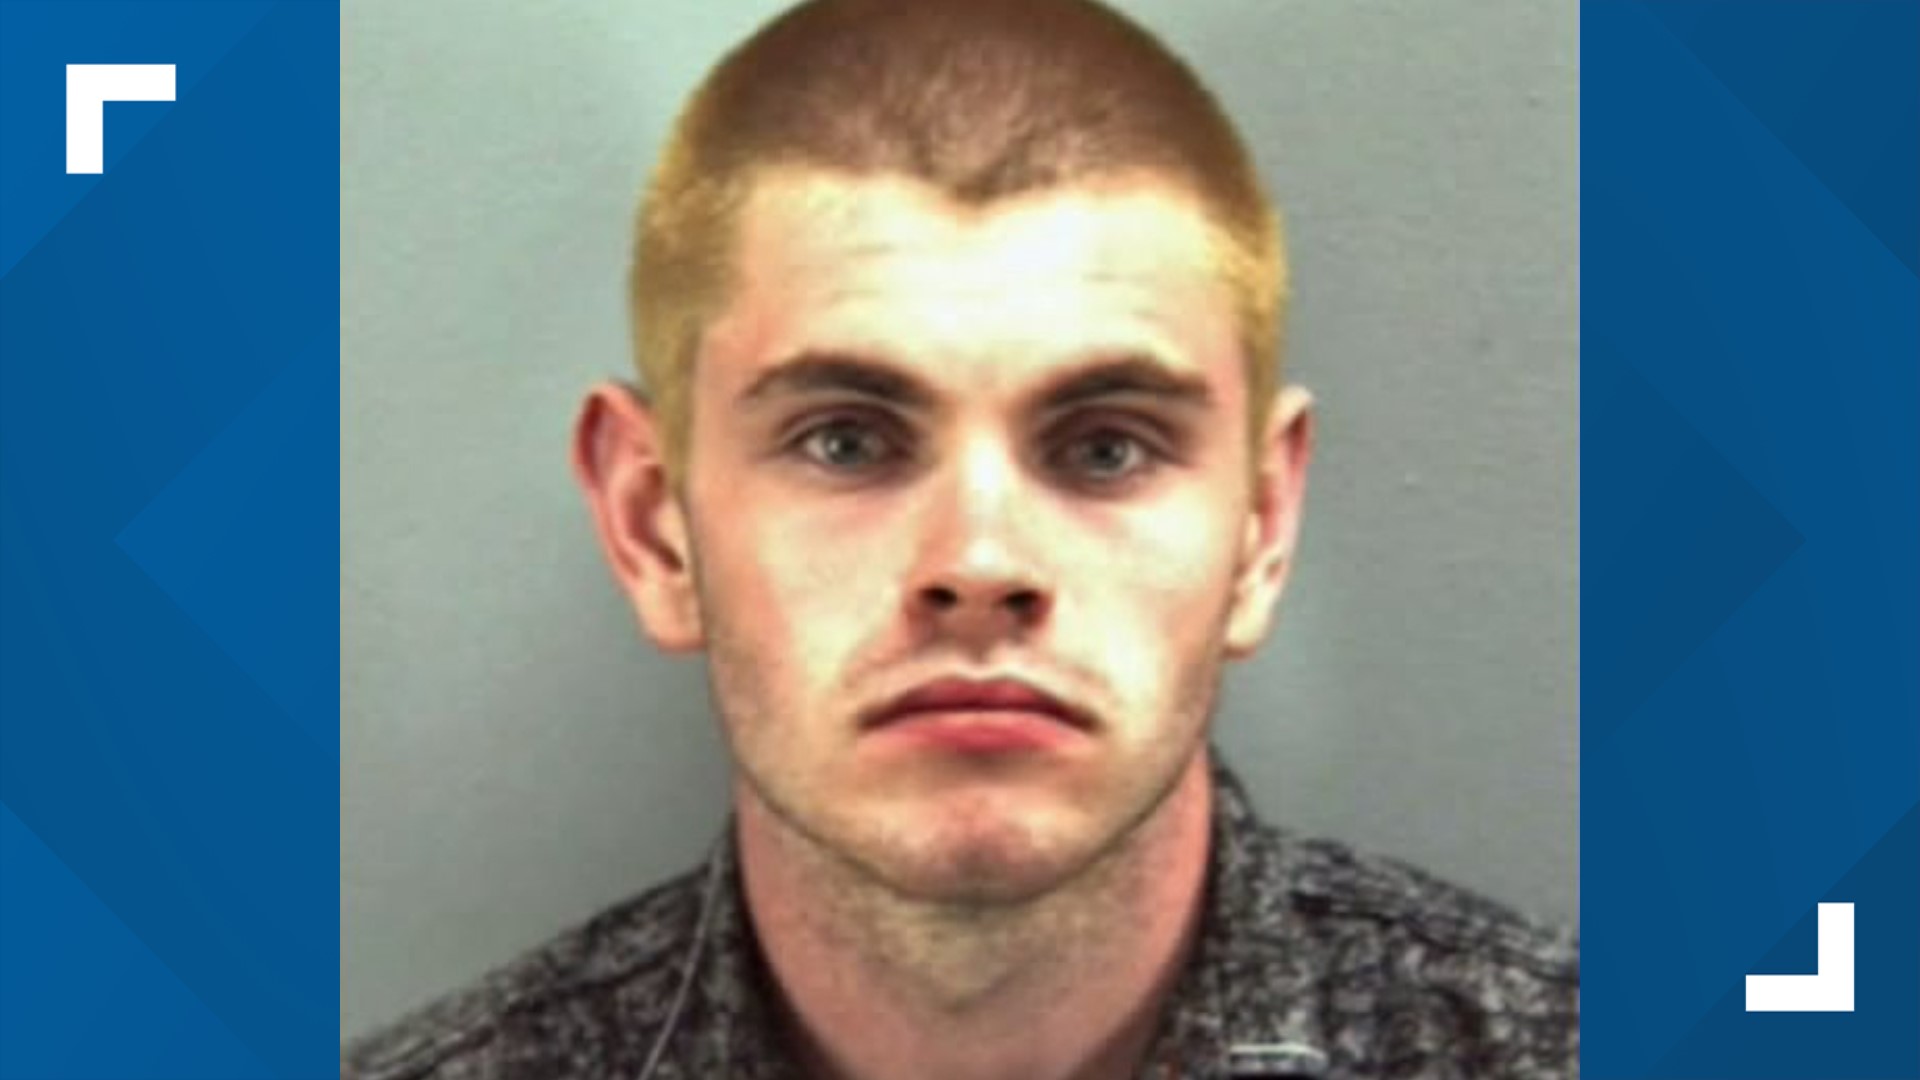 Christopher Skorets is accused of throwing 7 cats out of a second floor window.